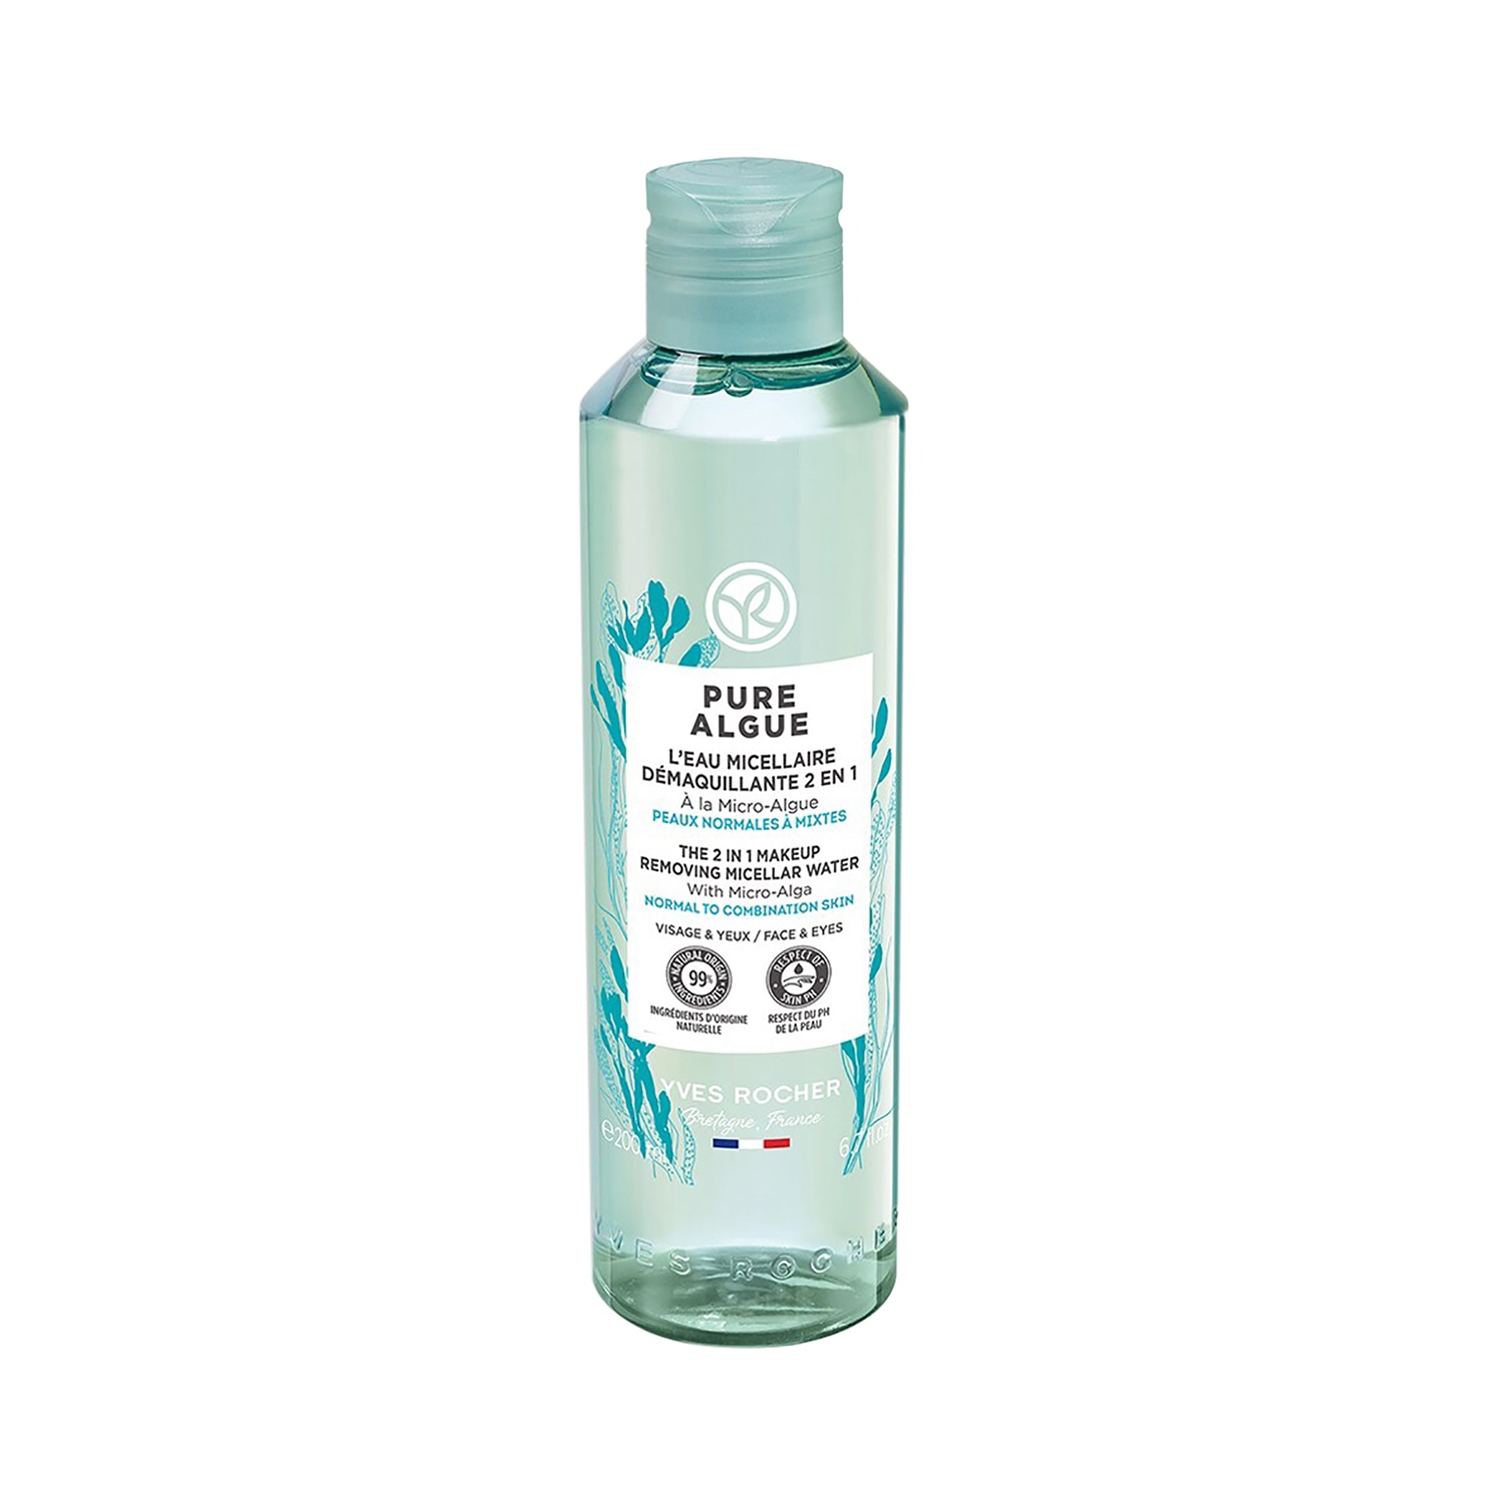 Yves Rocher Pure Algue The 2 In 1 Makeup Removing Micellar Water (200ml)